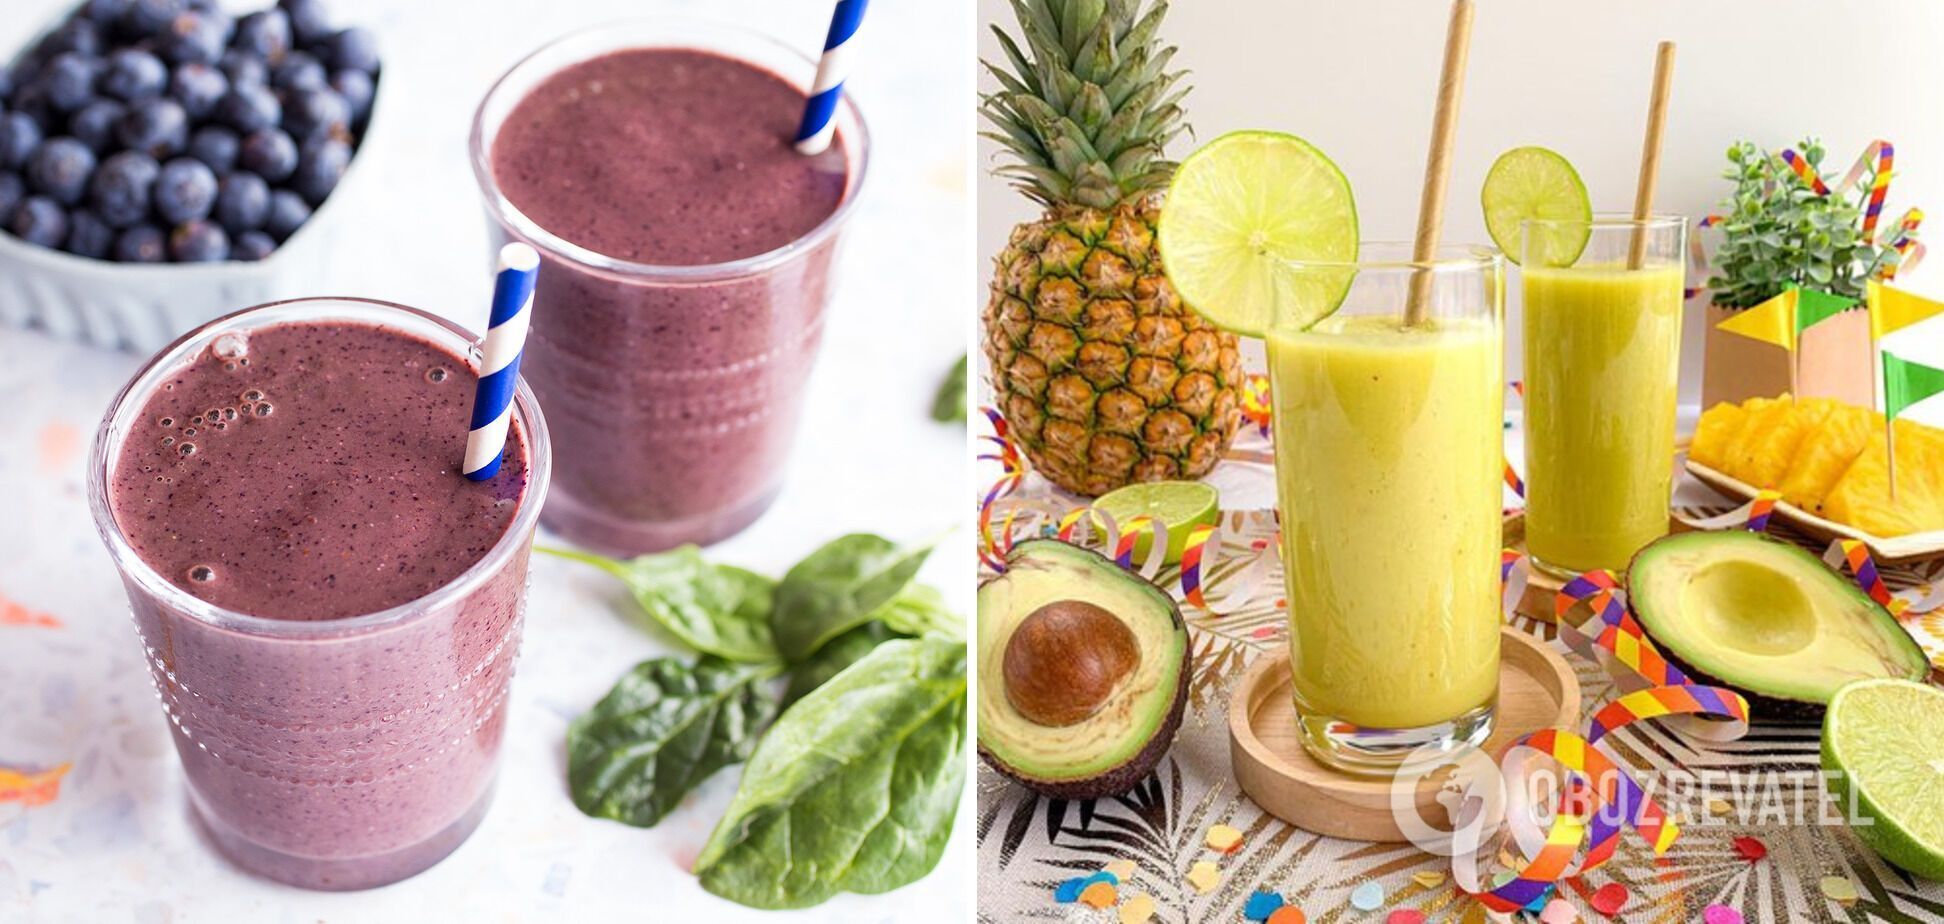 Two ingredients that can ruin a smoothie are named: it's best not to add them